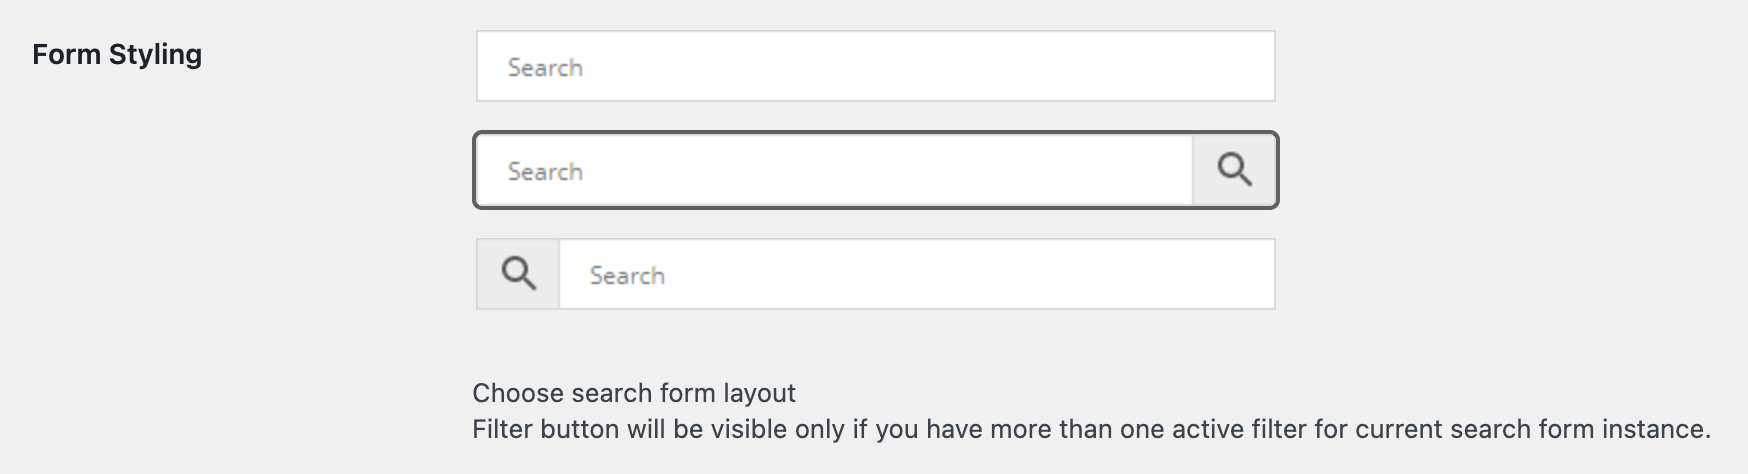 Search form layouts